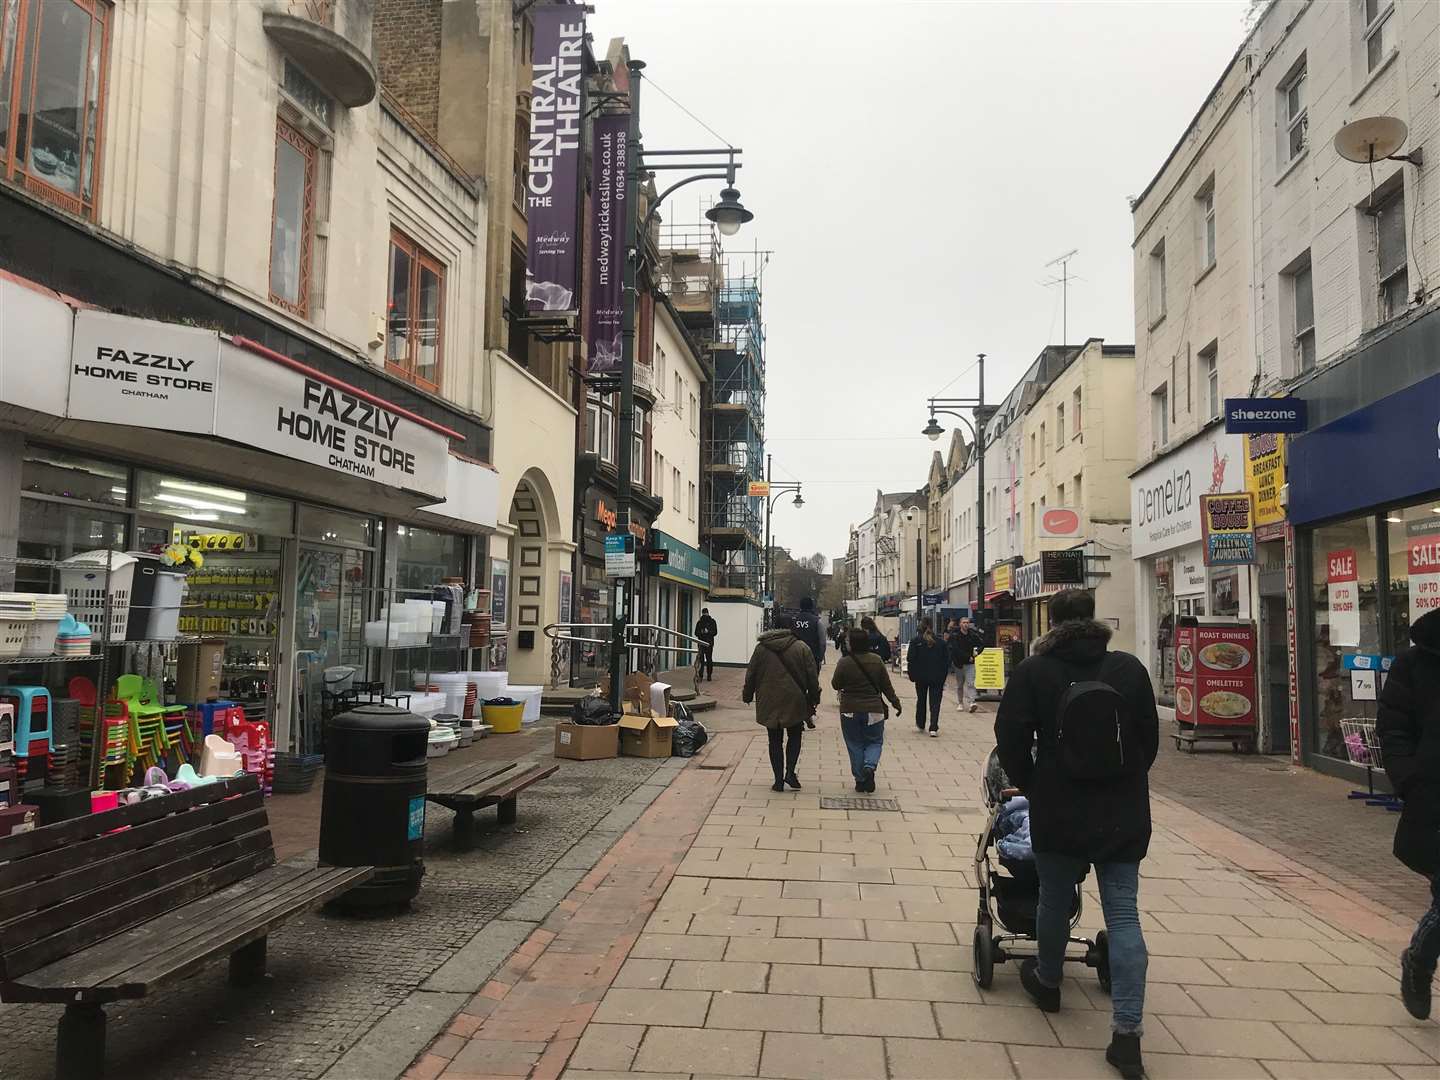 The fight happened in Chatham High Street